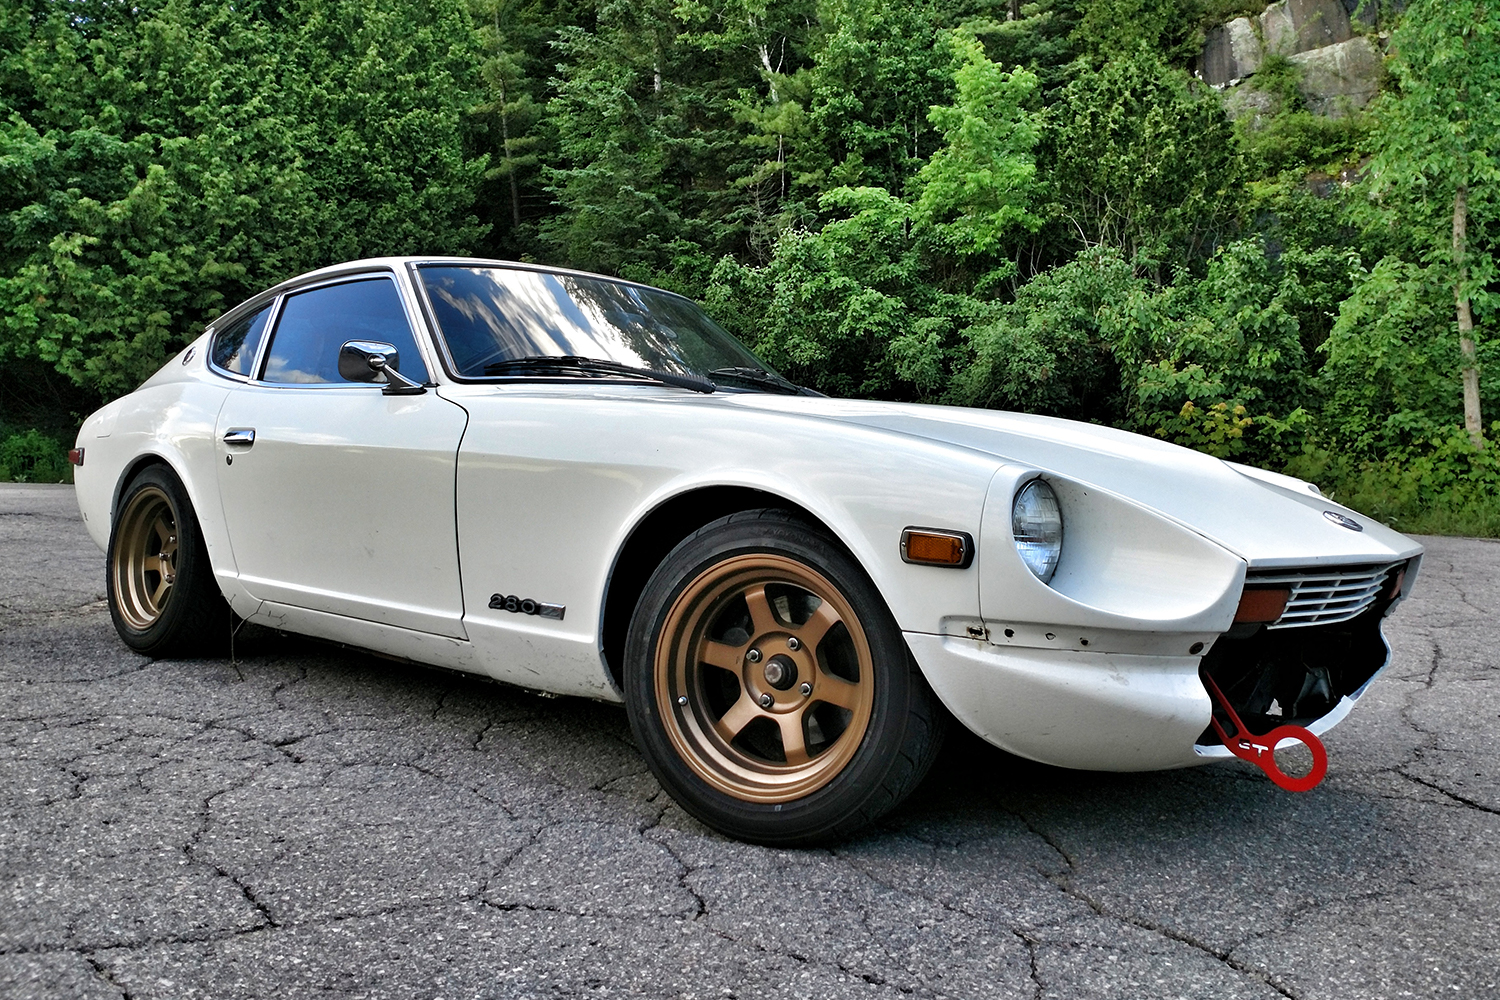 A white 1978 Datsun 280Z sports car sitting on asphalt in front of green trees. In this story, the Datsun owner talks about what it's like to own the '70s car.